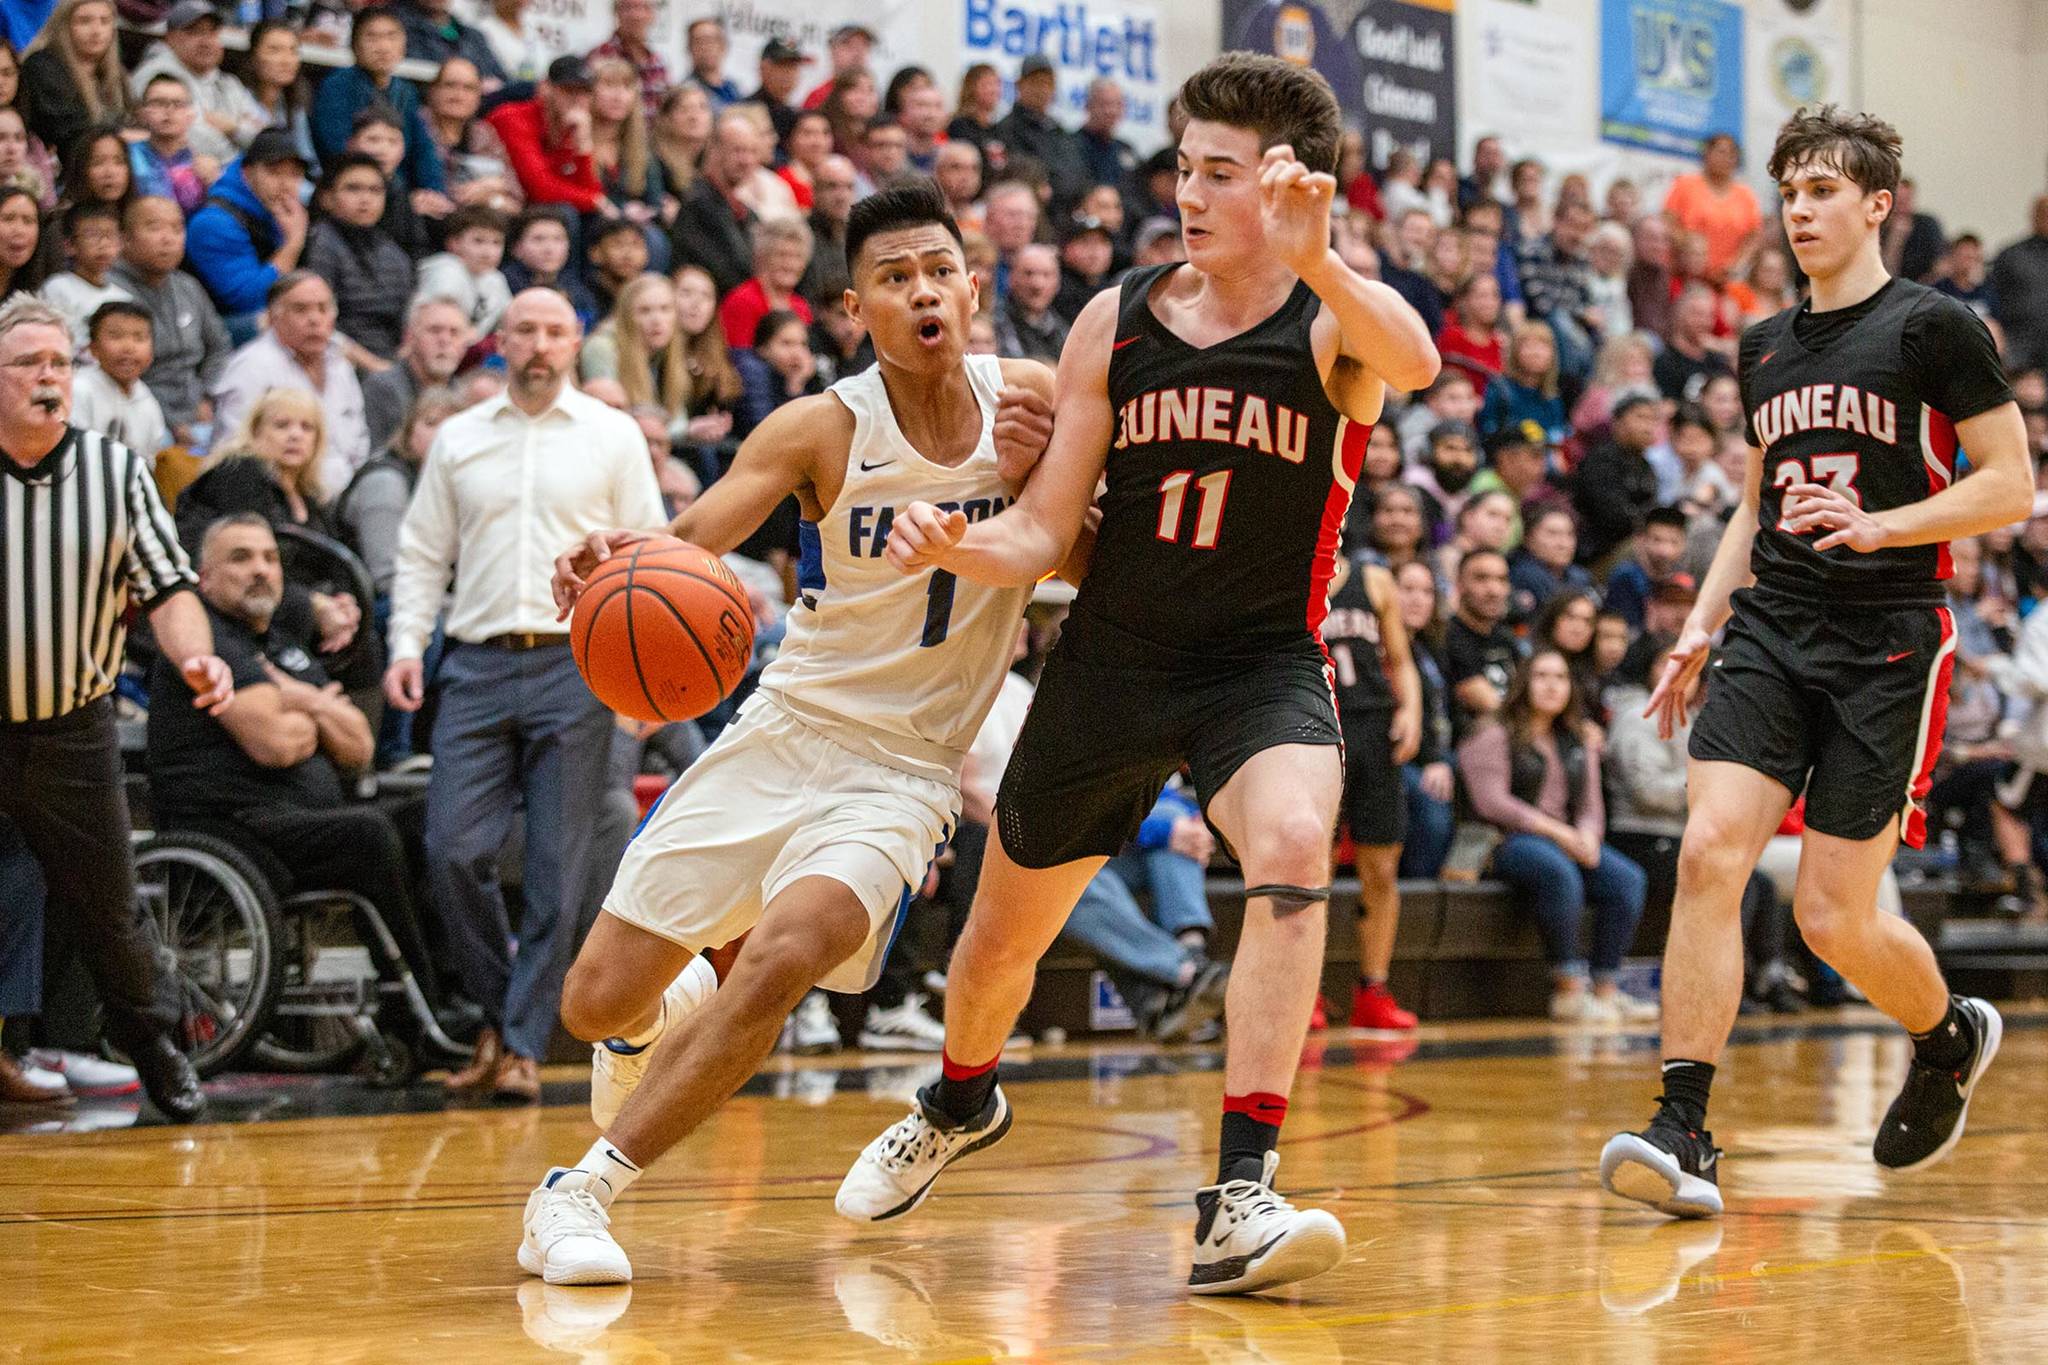 TMHS’ Brady Carandang makes his way down court while defended by JDHS’ Garrett Bryant and pursued by JDHS’ Cooper Kriegmont. (Courtesy Photo | Heather Holt)